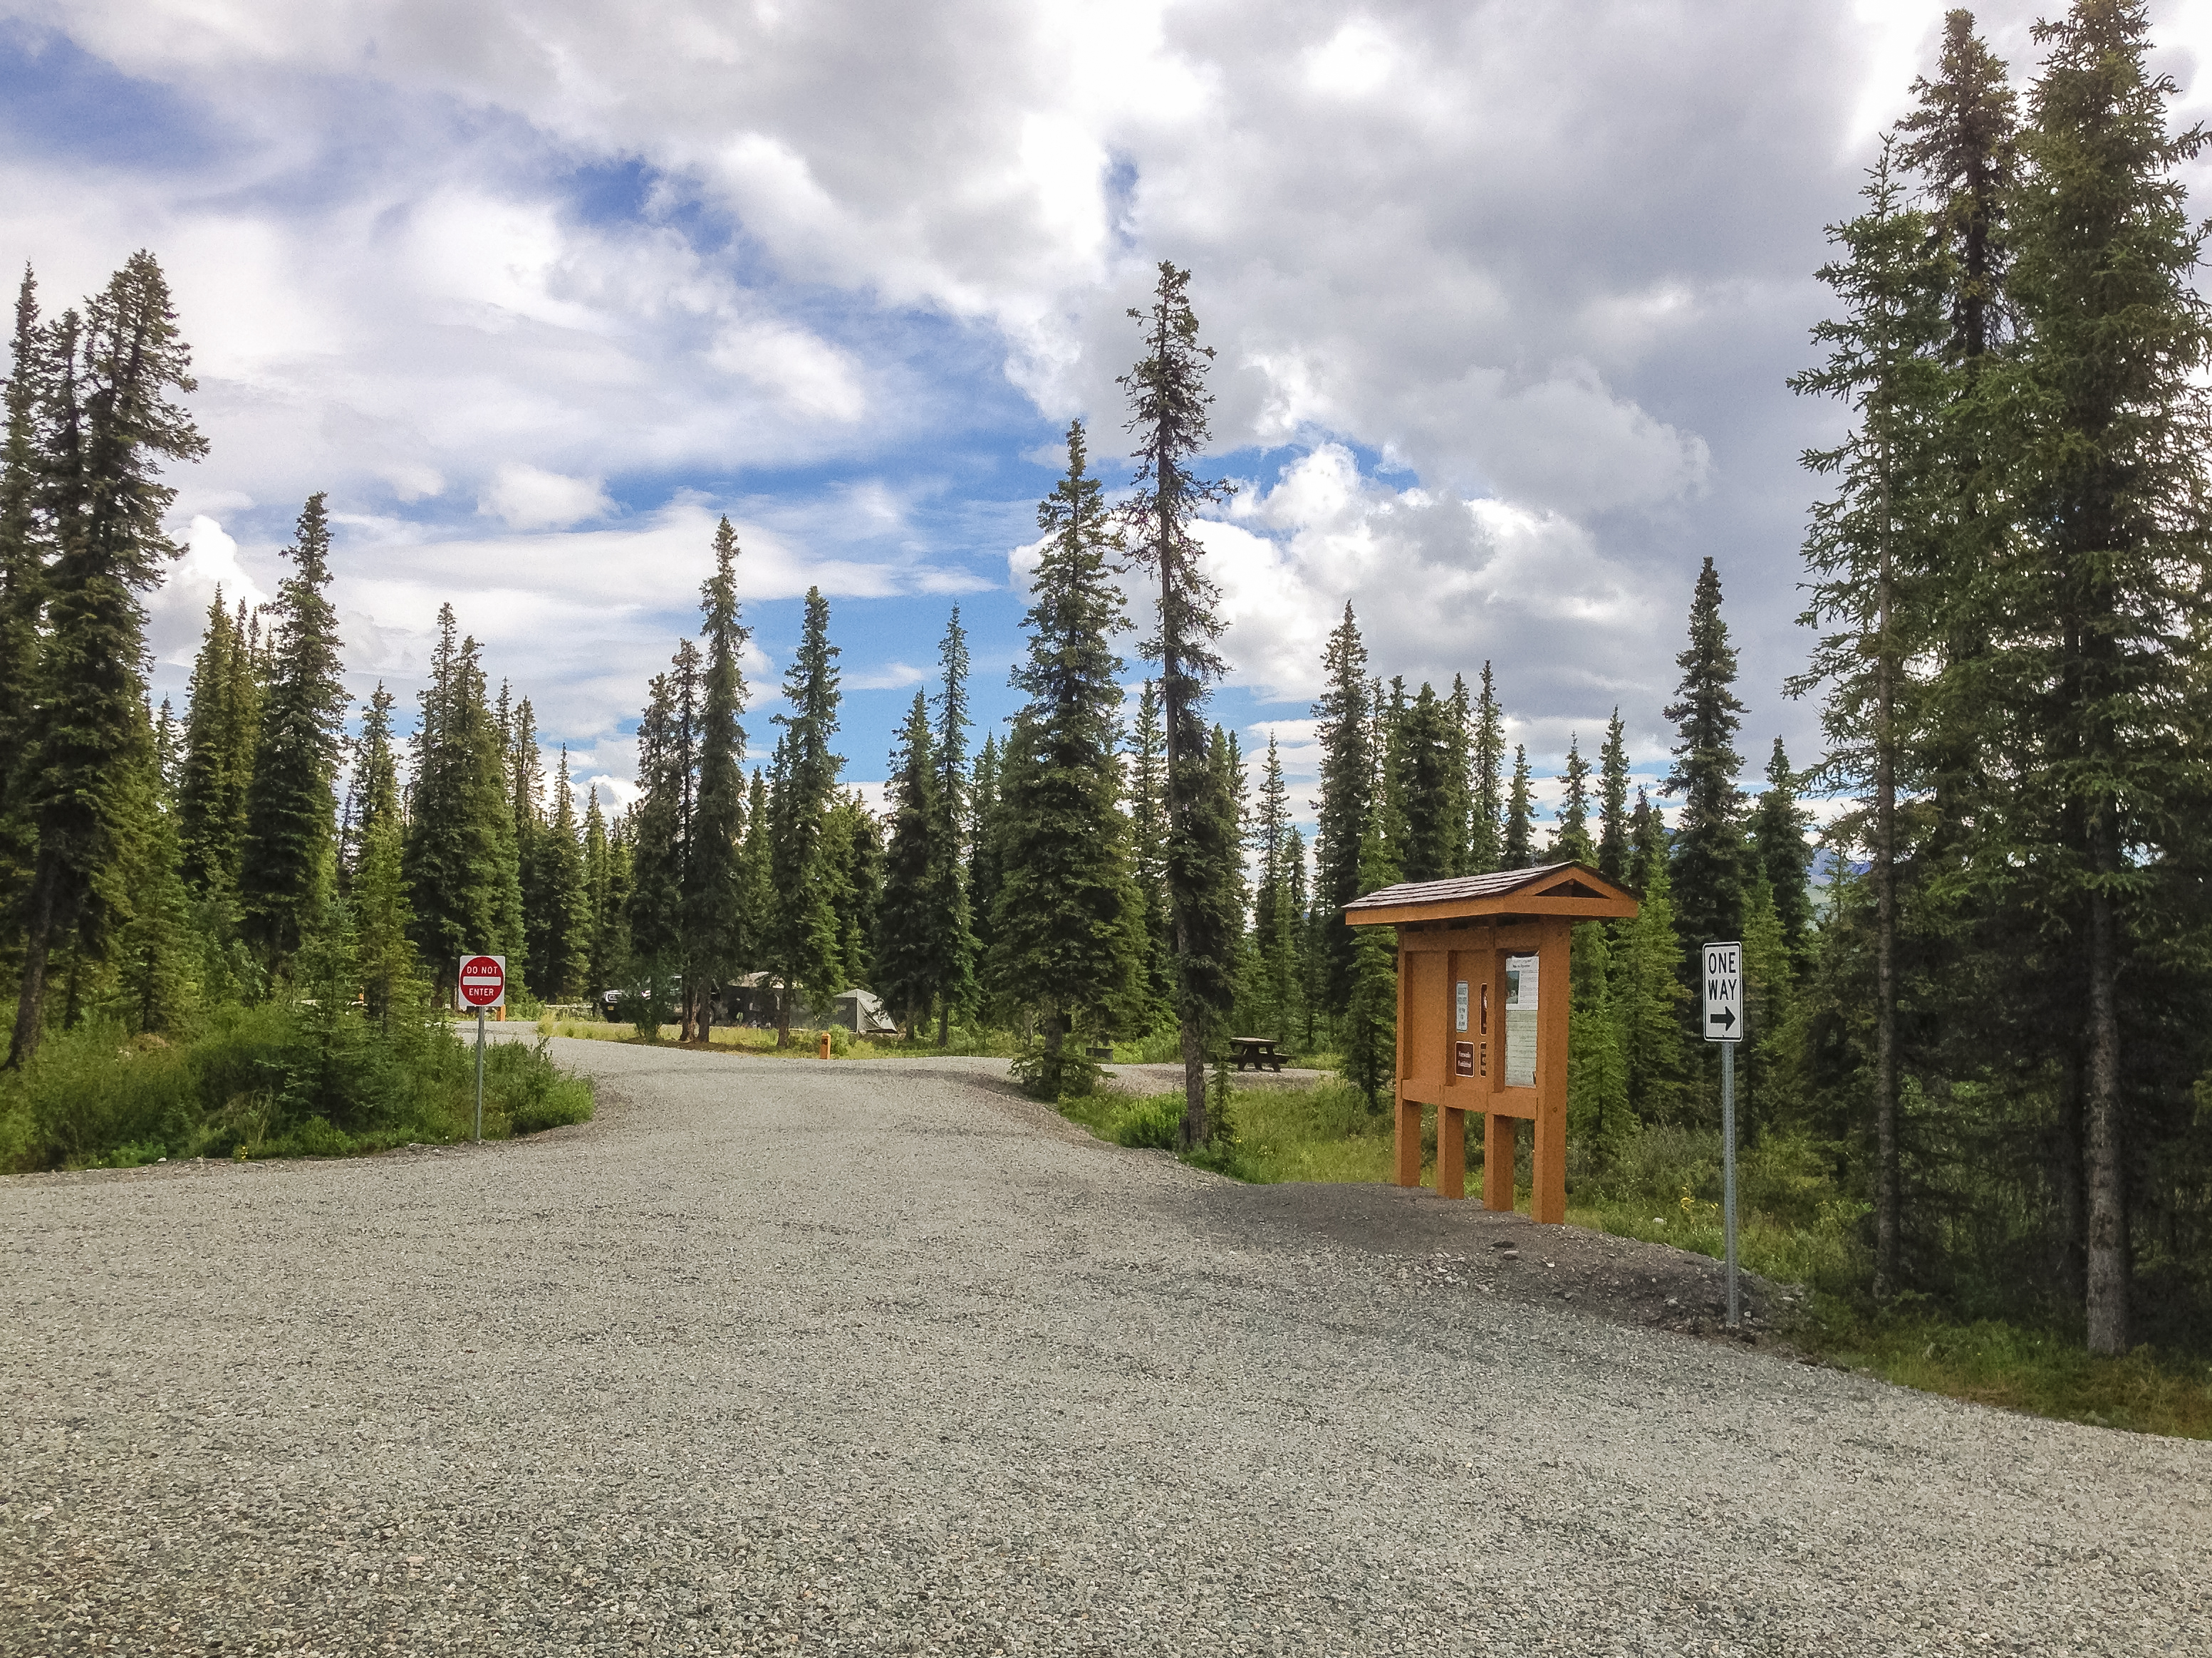 View of campground road and campsites with forest and cloudy skies in the background.